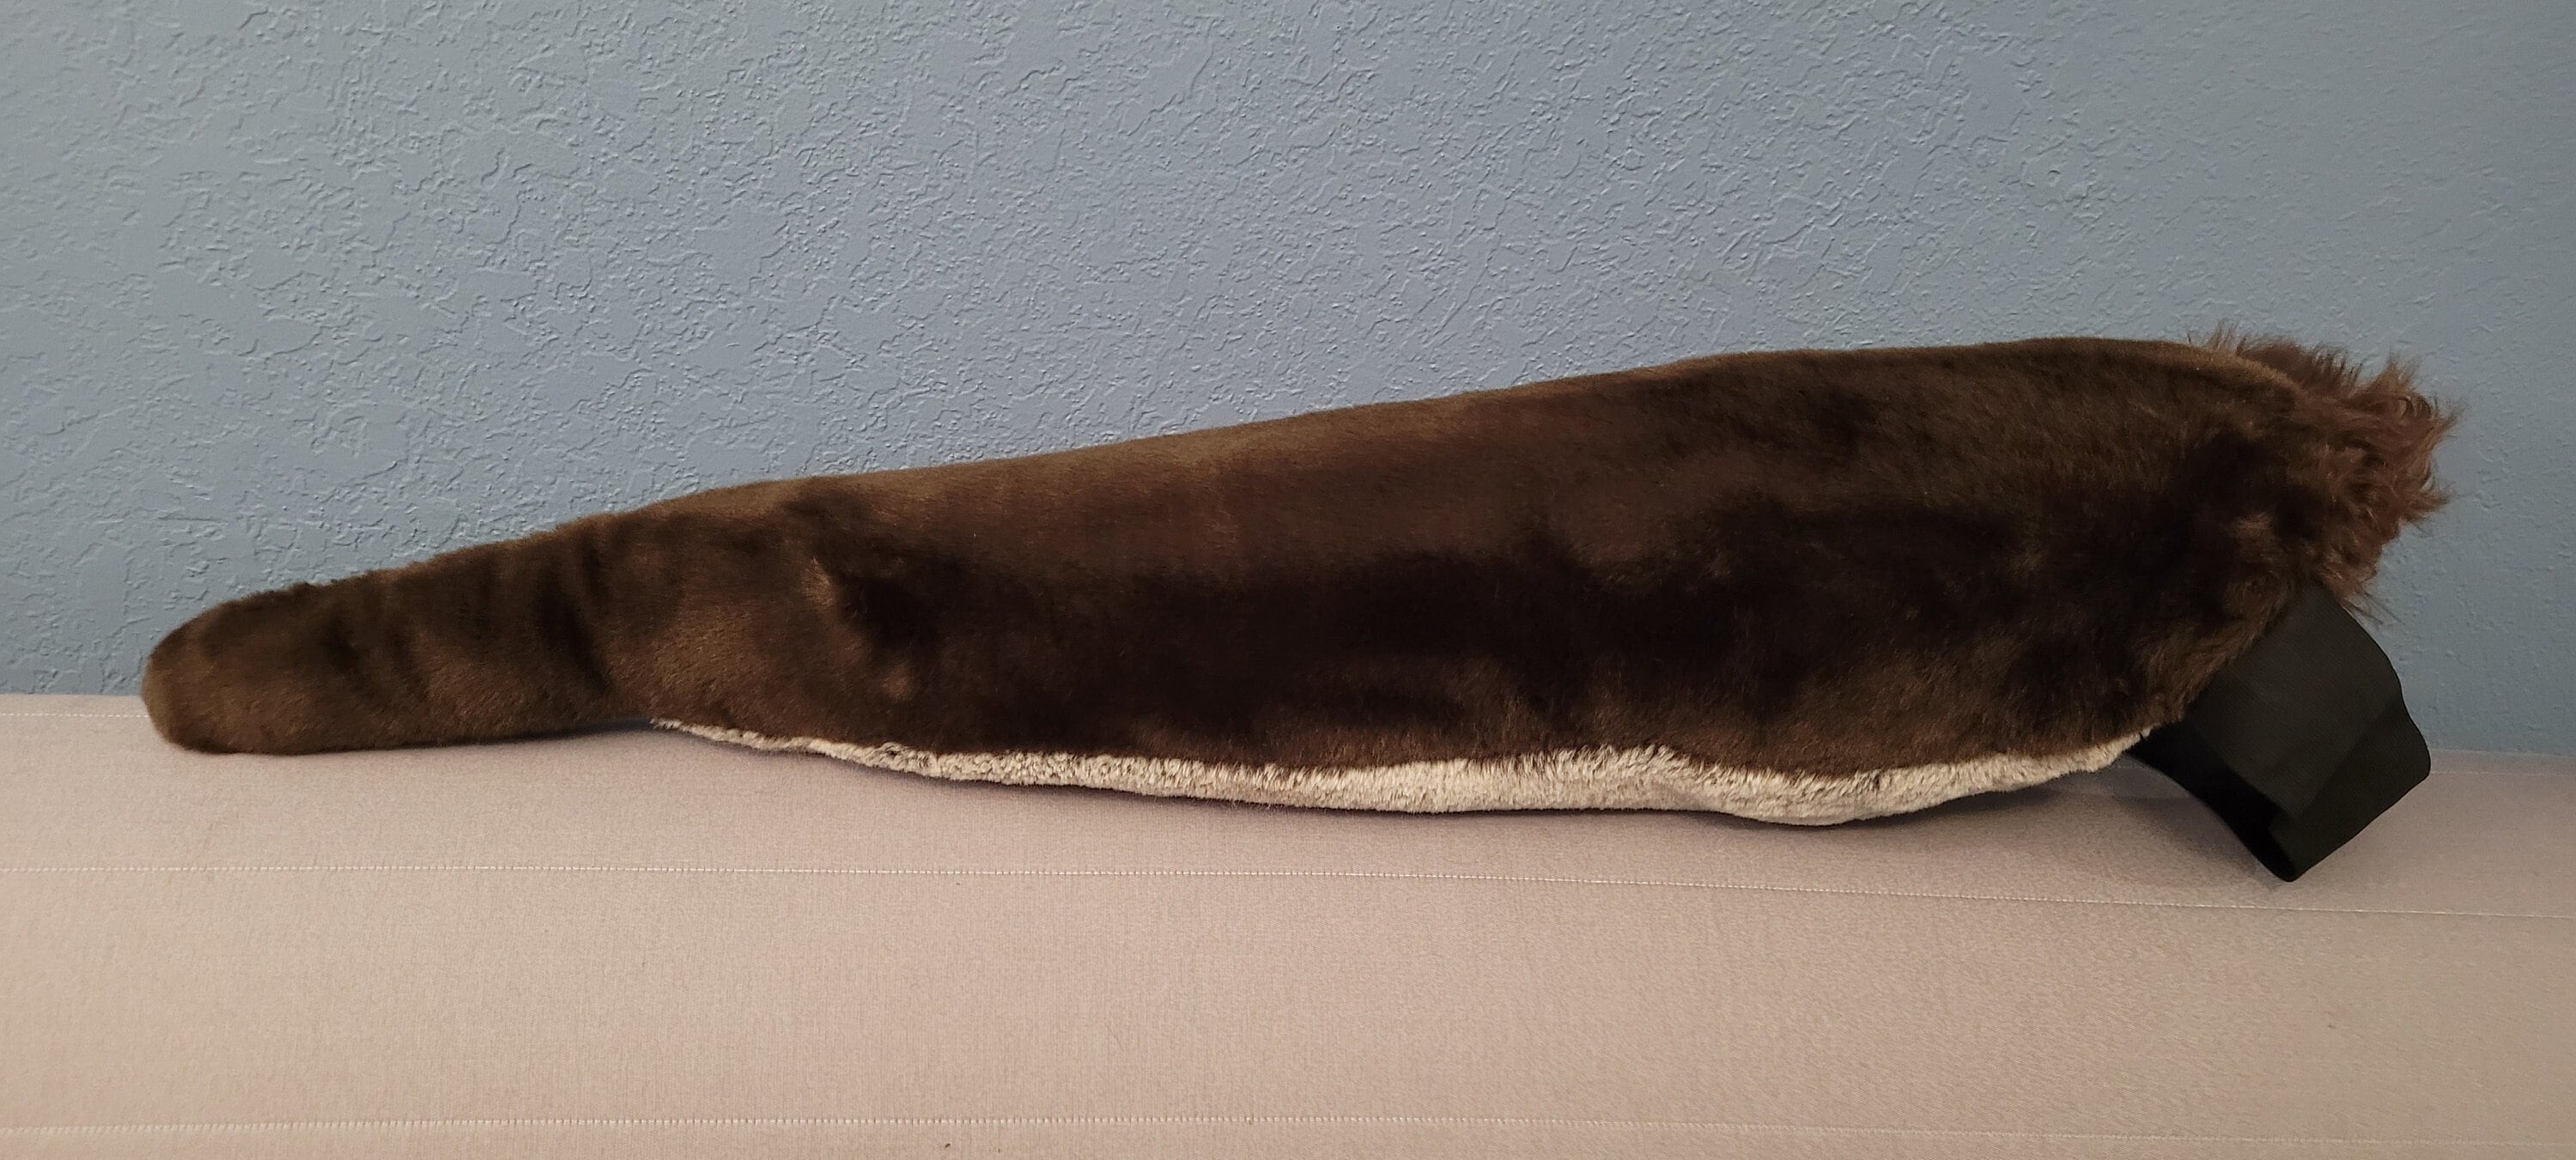 Realistic 32-inch Otter Tail for Cosplay and the Furry Fandom